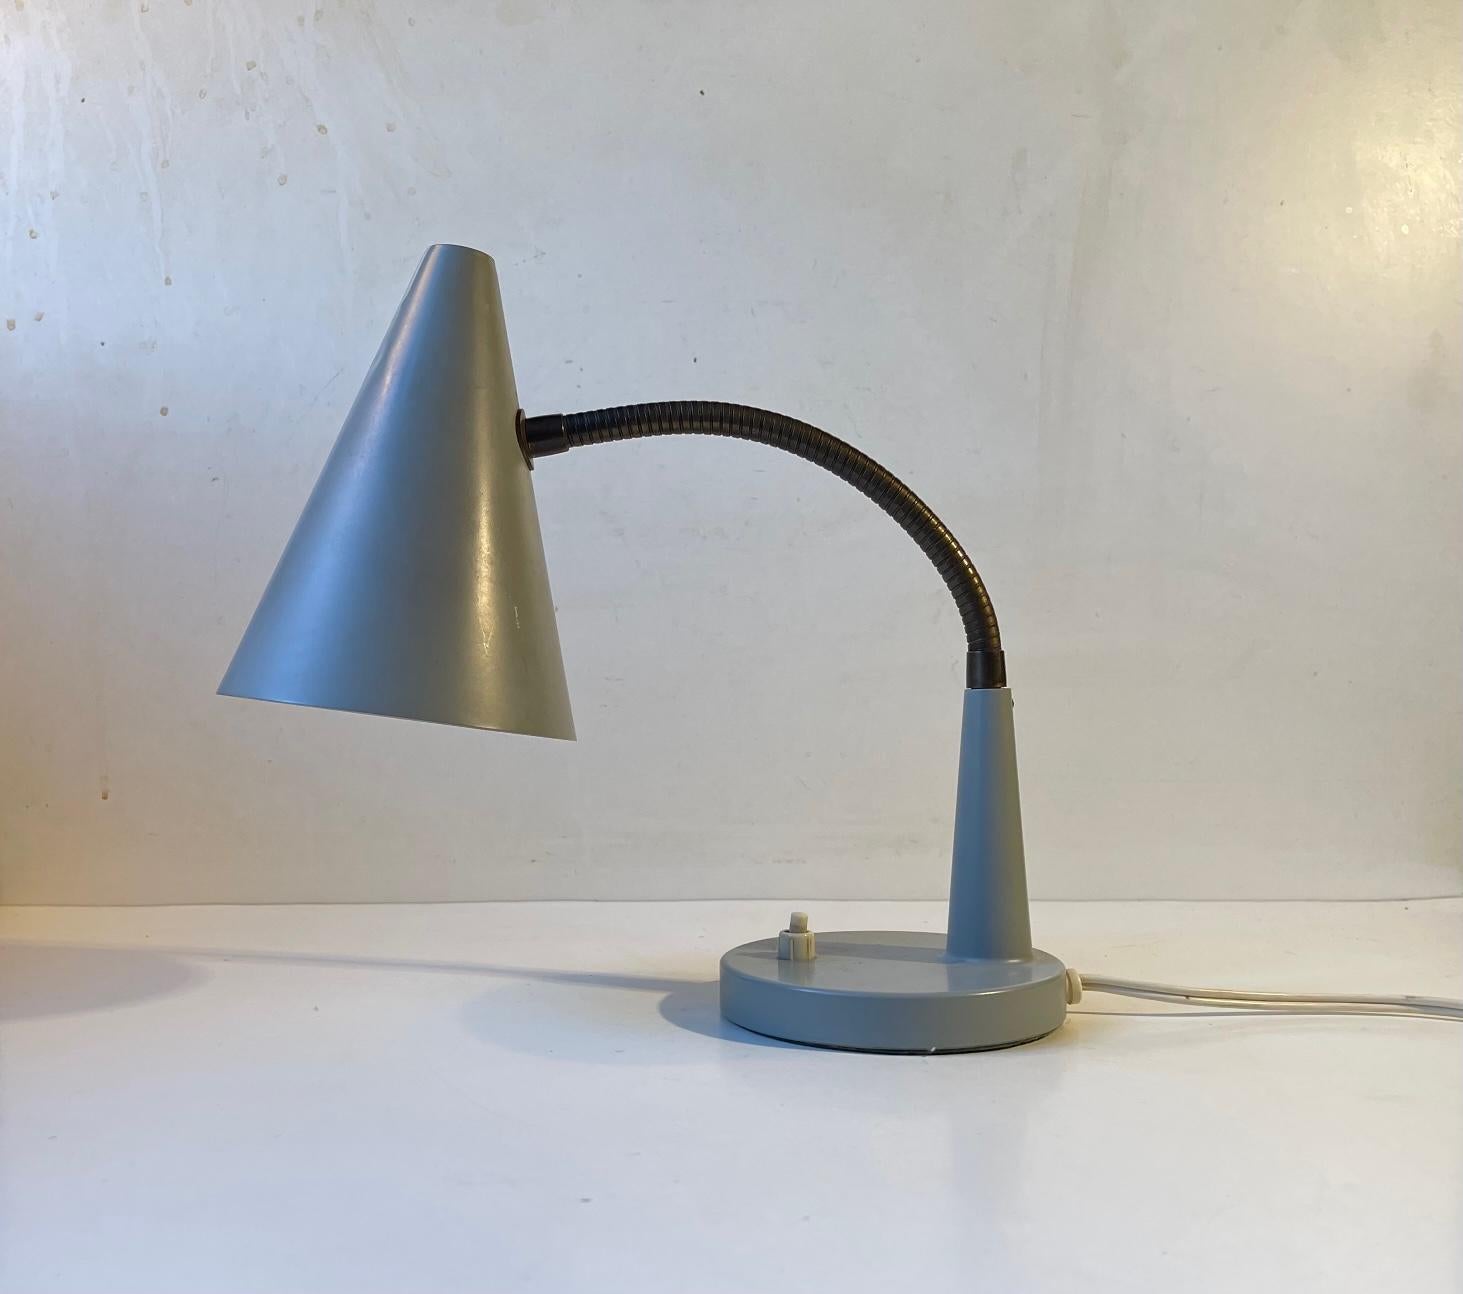 Small fully adjustable table lamp or wall light with flexible brass goose neck. Manufactured and designed by E. S. Horn in Aalestrup, Denmark during the 1950s. The style of this light is highly influenced by the Bauhaus movement, Arne Jacobsen and